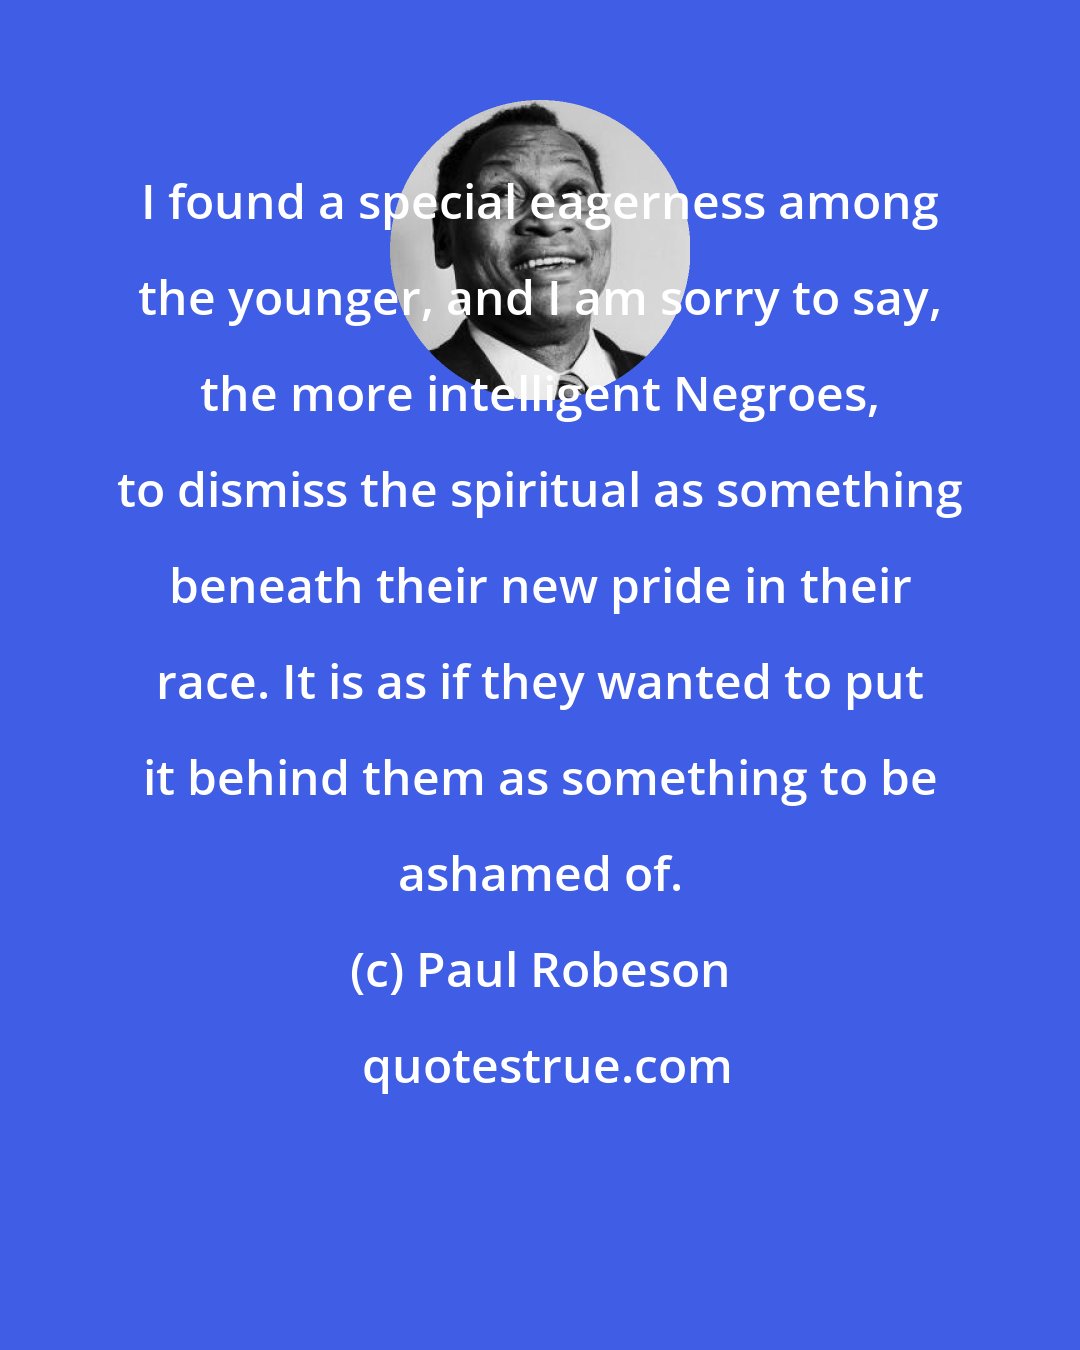 Paul Robeson: I found a special eagerness among the younger, and I am sorry to say, the more intelligent Negroes, to dismiss the spiritual as something beneath their new pride in their race. It is as if they wanted to put it behind them as something to be ashamed of.